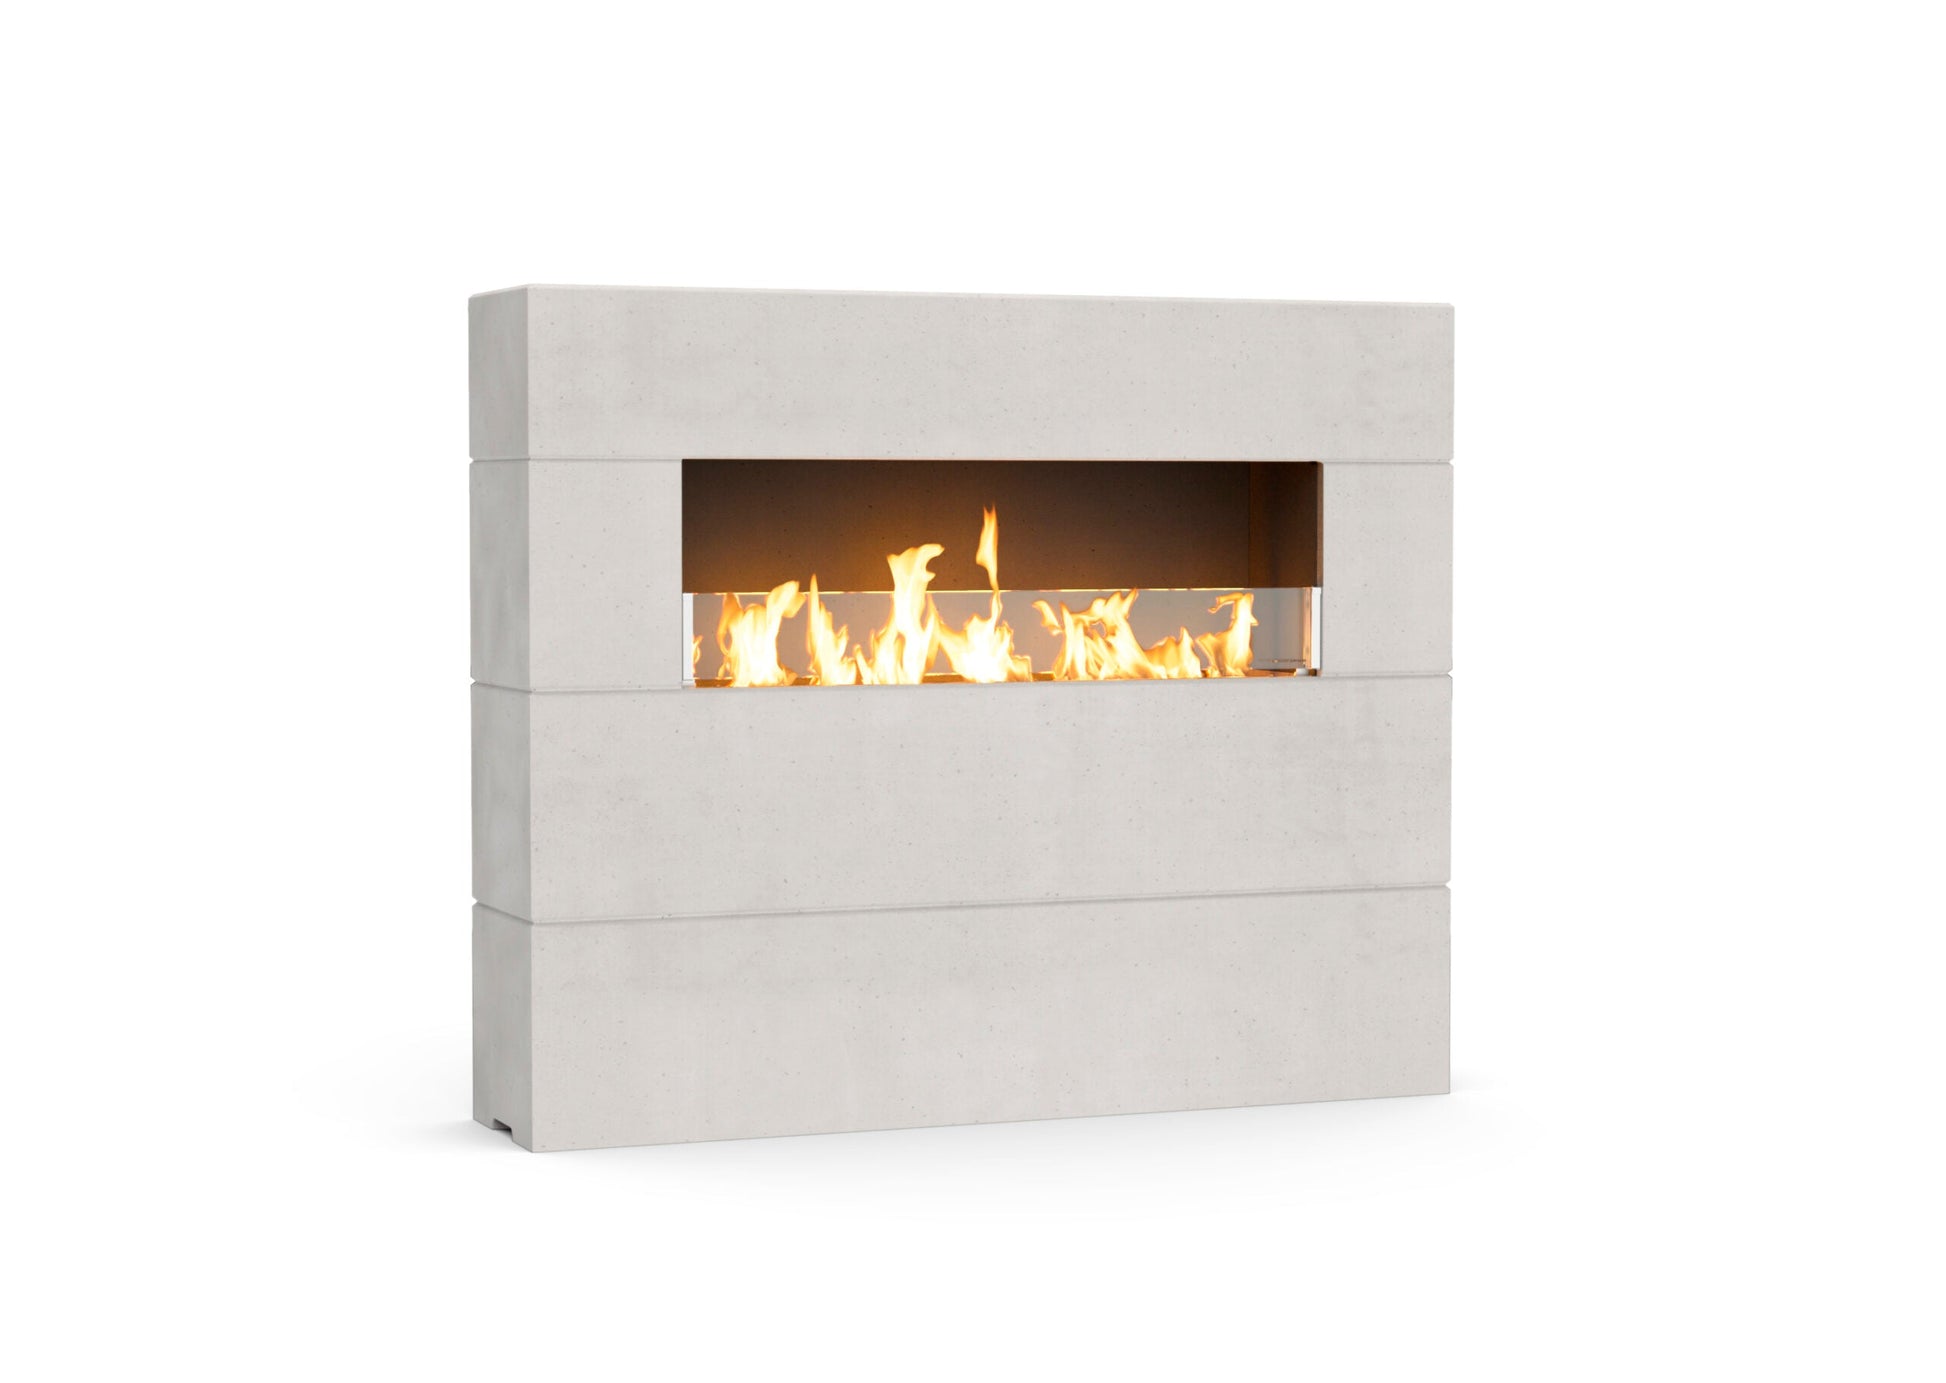 American Fyre Designs Milan Tall 60" White Aspen Natural Gas Fireplace with Manual Flame Sensing Control